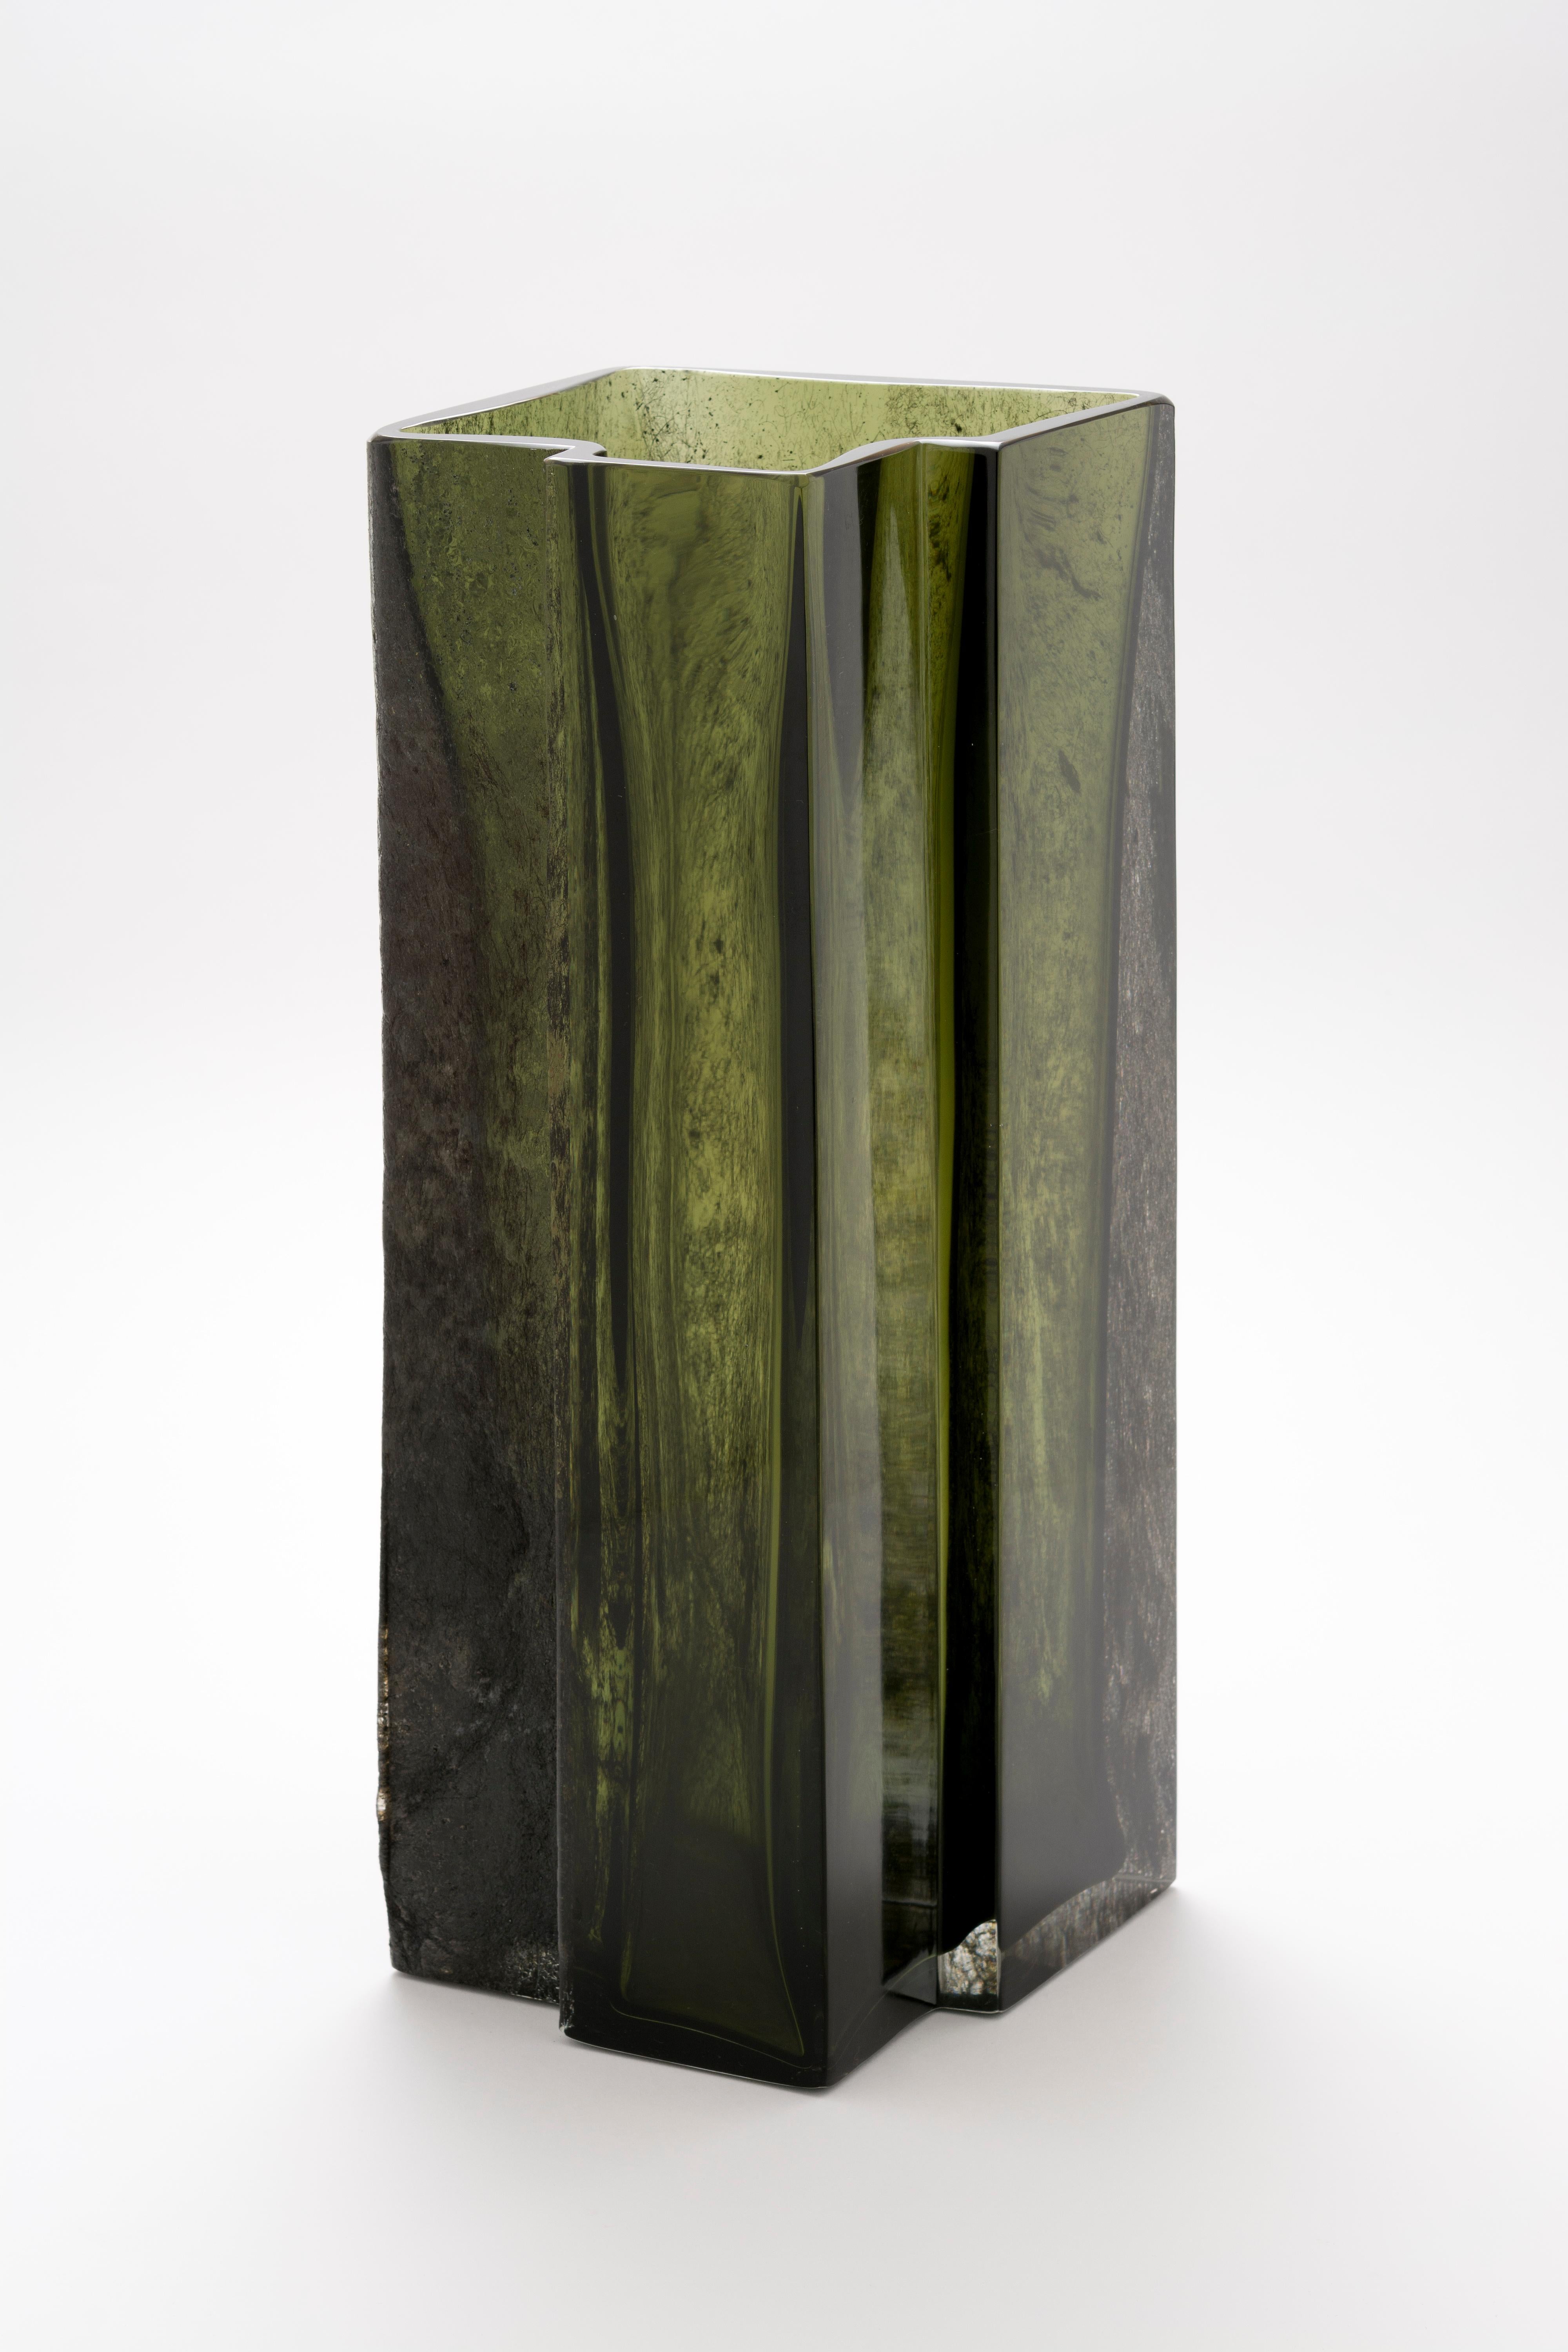 Glimmer of light vase by Paolo Marcolongo
Dimensions: 42.2 x 16.4 x H 16.2 cm 
Materials: Murano glass and iron. 


Paolo Marcolongo was born in Padua in 1956, he attended the Art High School 